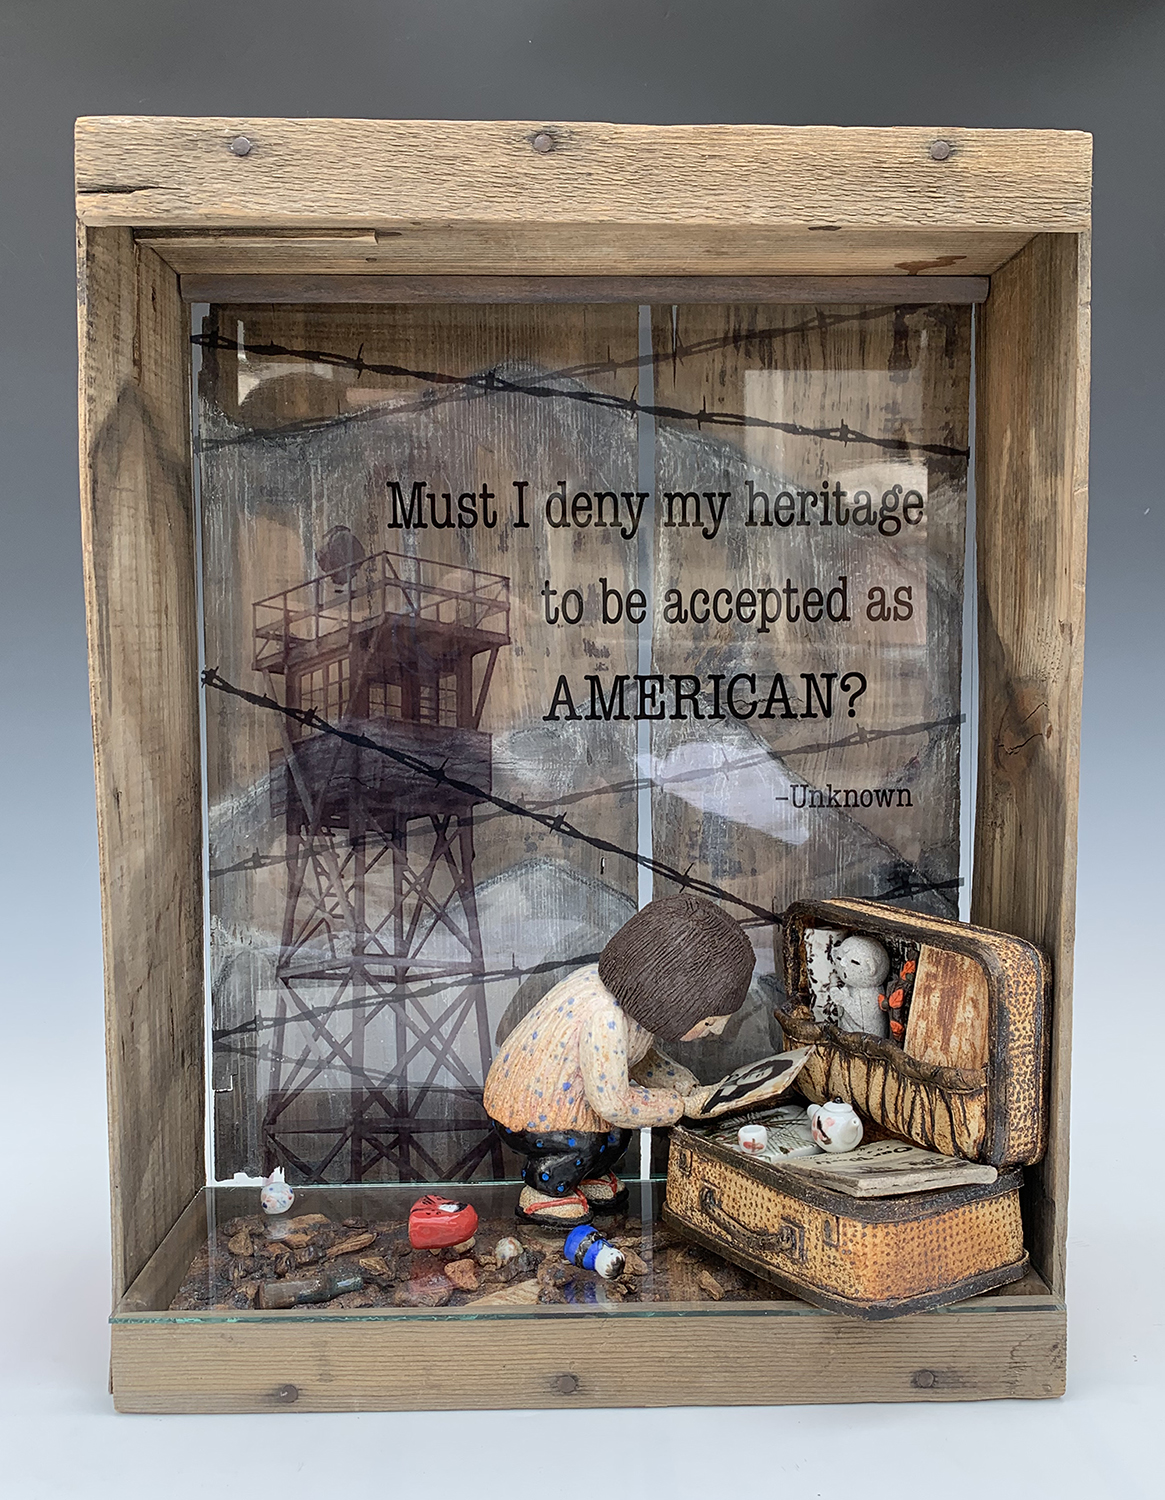 This sculpture by Kathy Yoshihara is a memorial to a relative who was interned with Japanese Americans during World War Two. It contains a figure kneeling over an open suitcase that recounts that the interned could bring only what they could carry. The figure is placed inside a found box, with a computer generated picture of a guard tower and barbed wire.